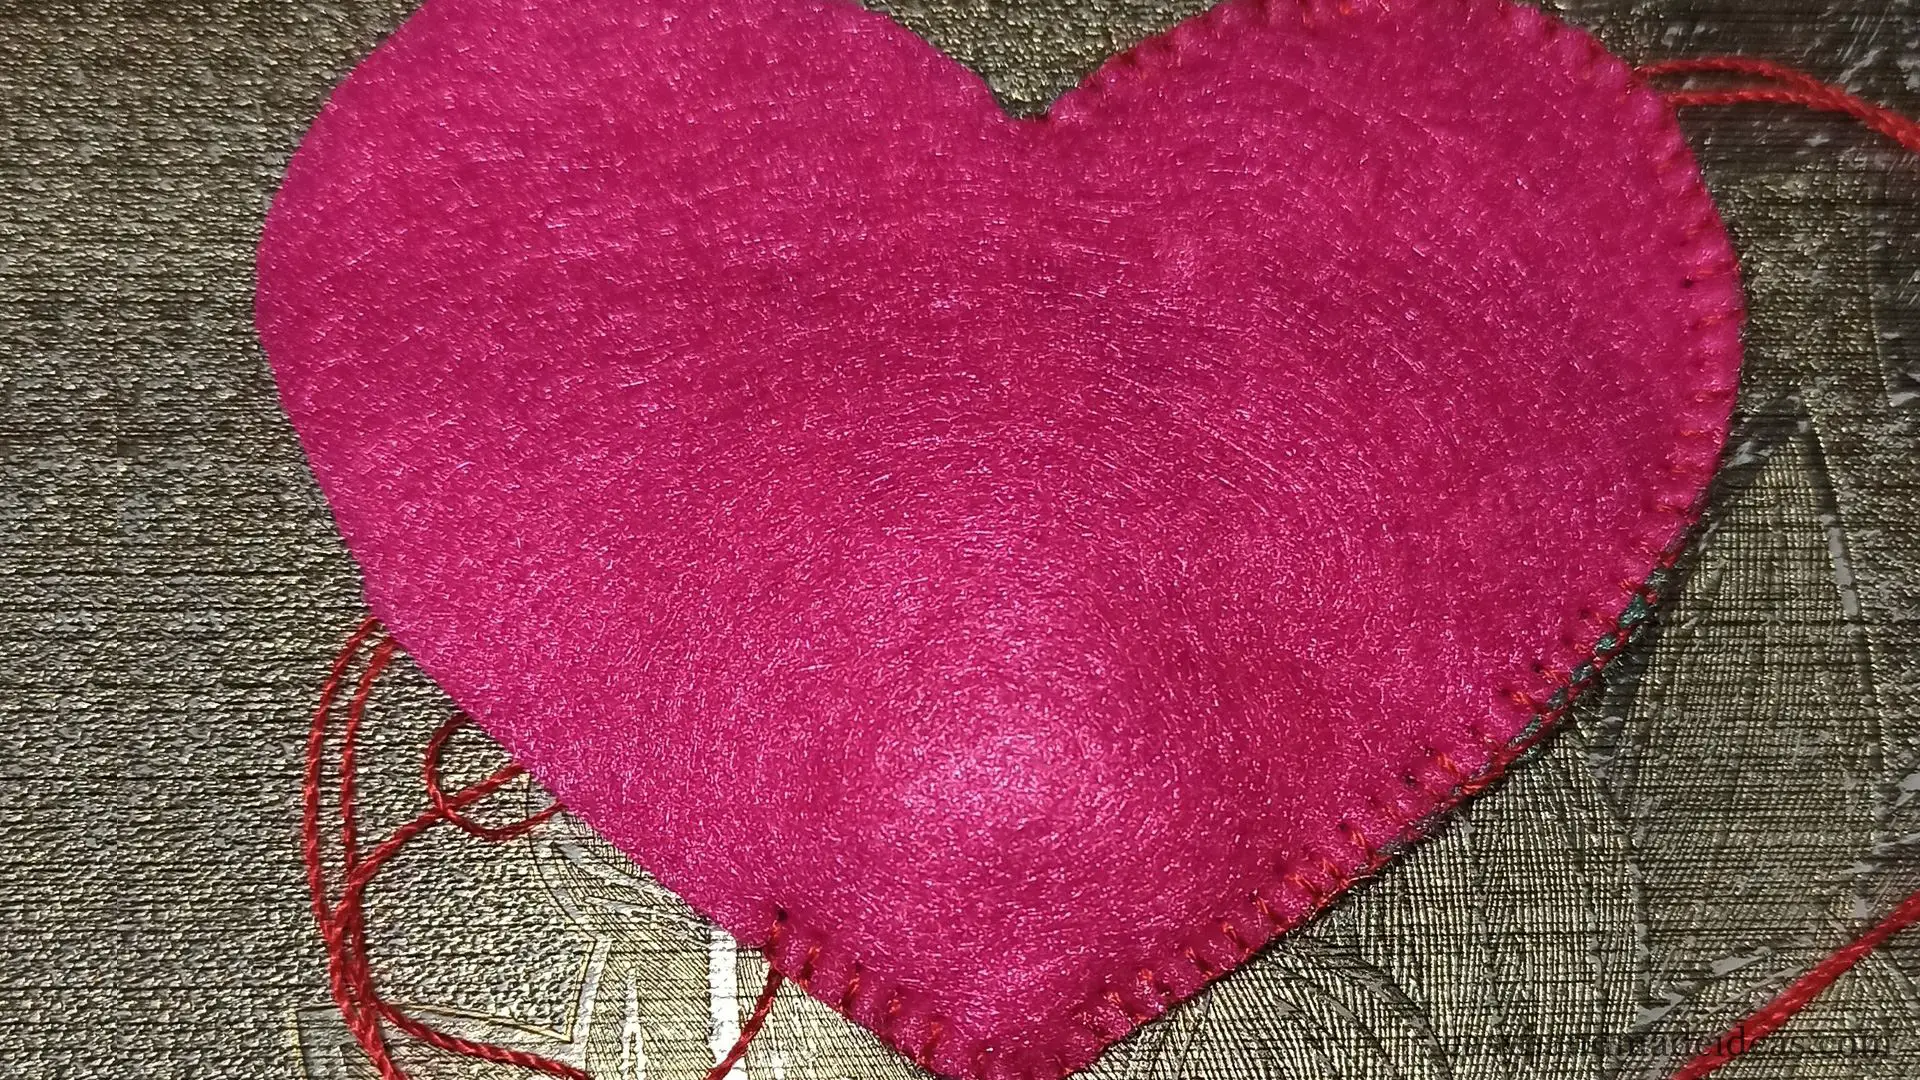 The felt heart is stitched on the other side